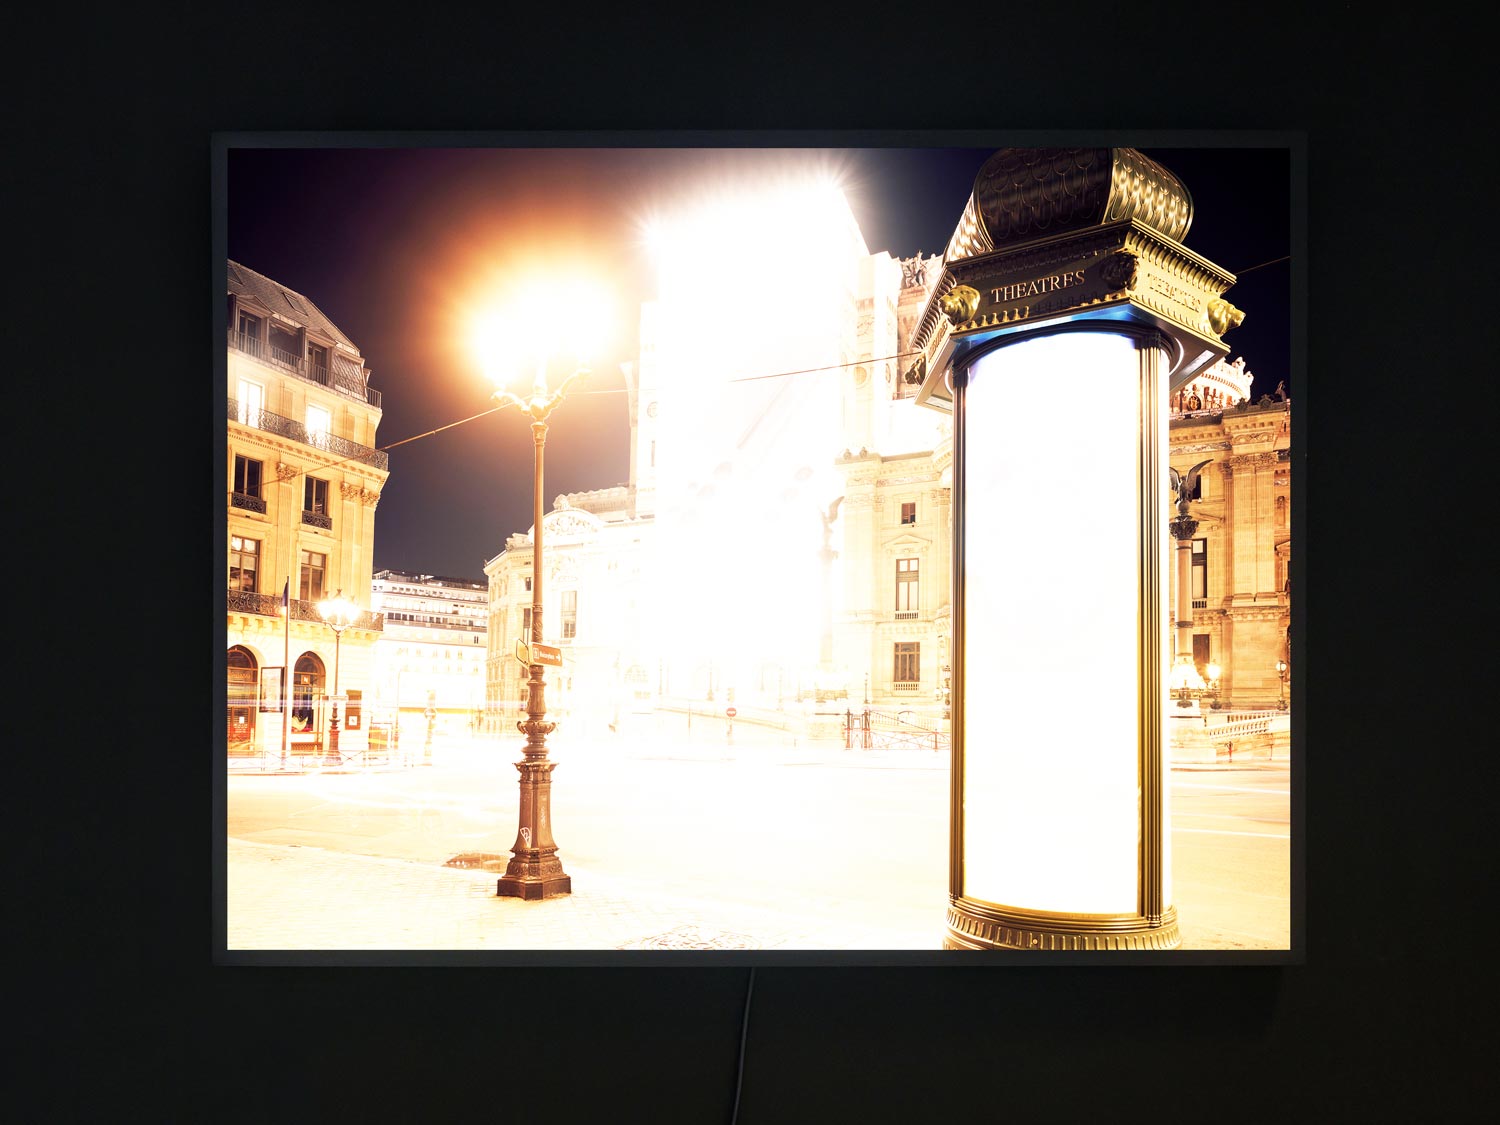 PAR01-09, 2022 - Archival backlit film mounted in lightbox frame with dimmable LED, 122x92cm